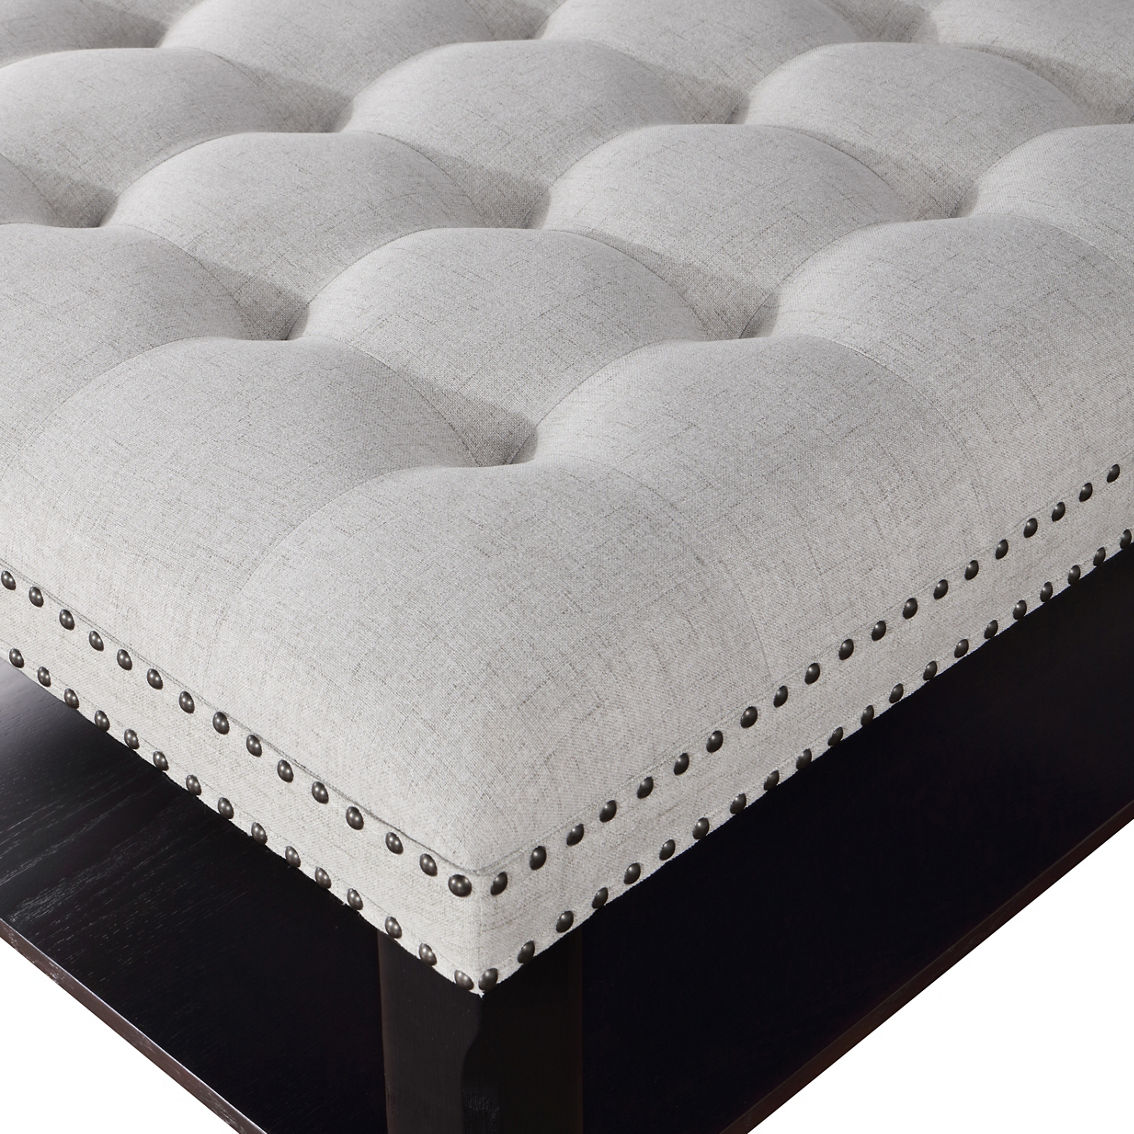 Furniture of America Button Tufted Wood Cocktail Ottoman - Image 3 of 3